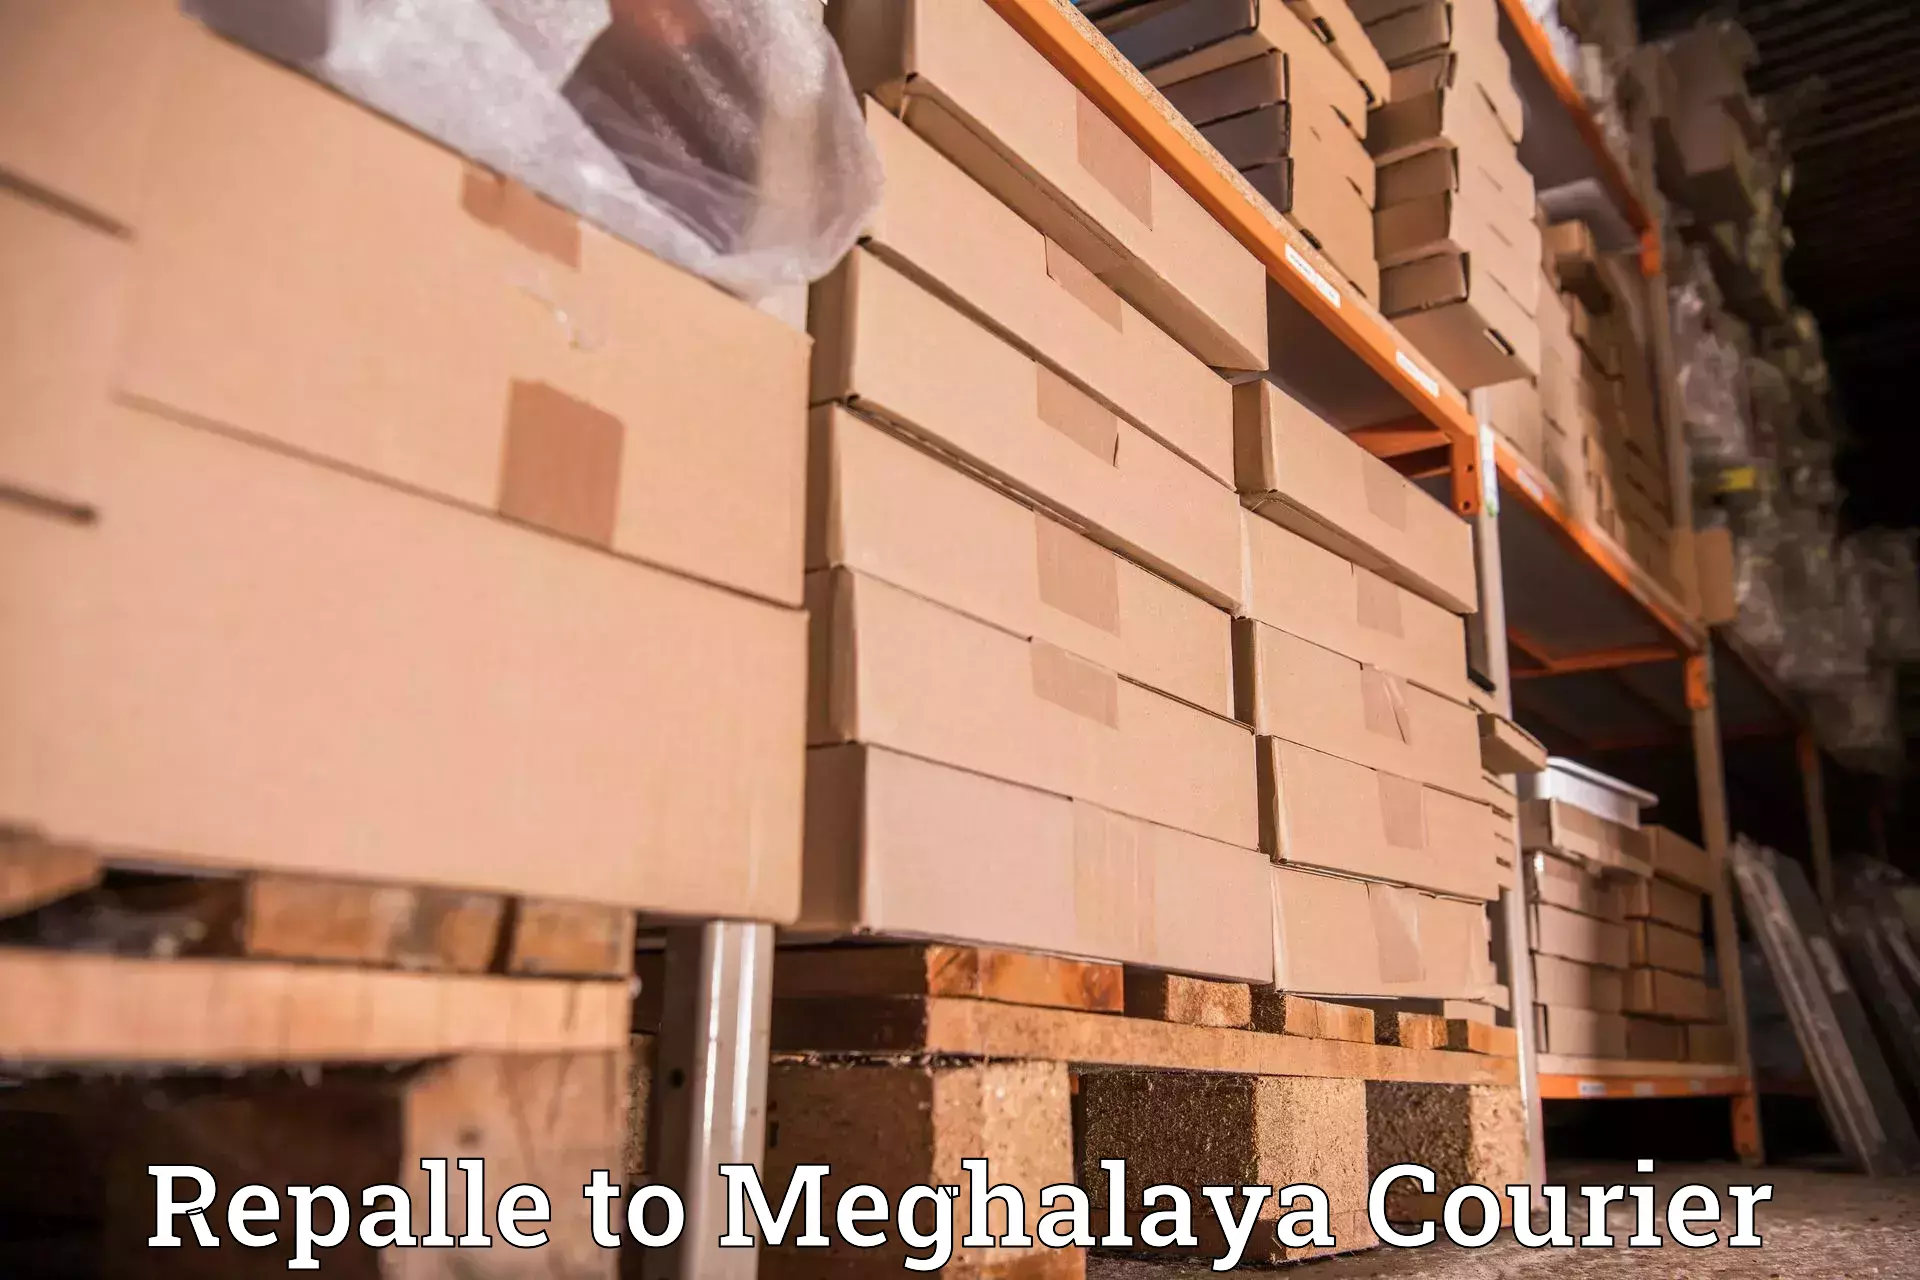 Courier service efficiency Repalle to Meghalaya